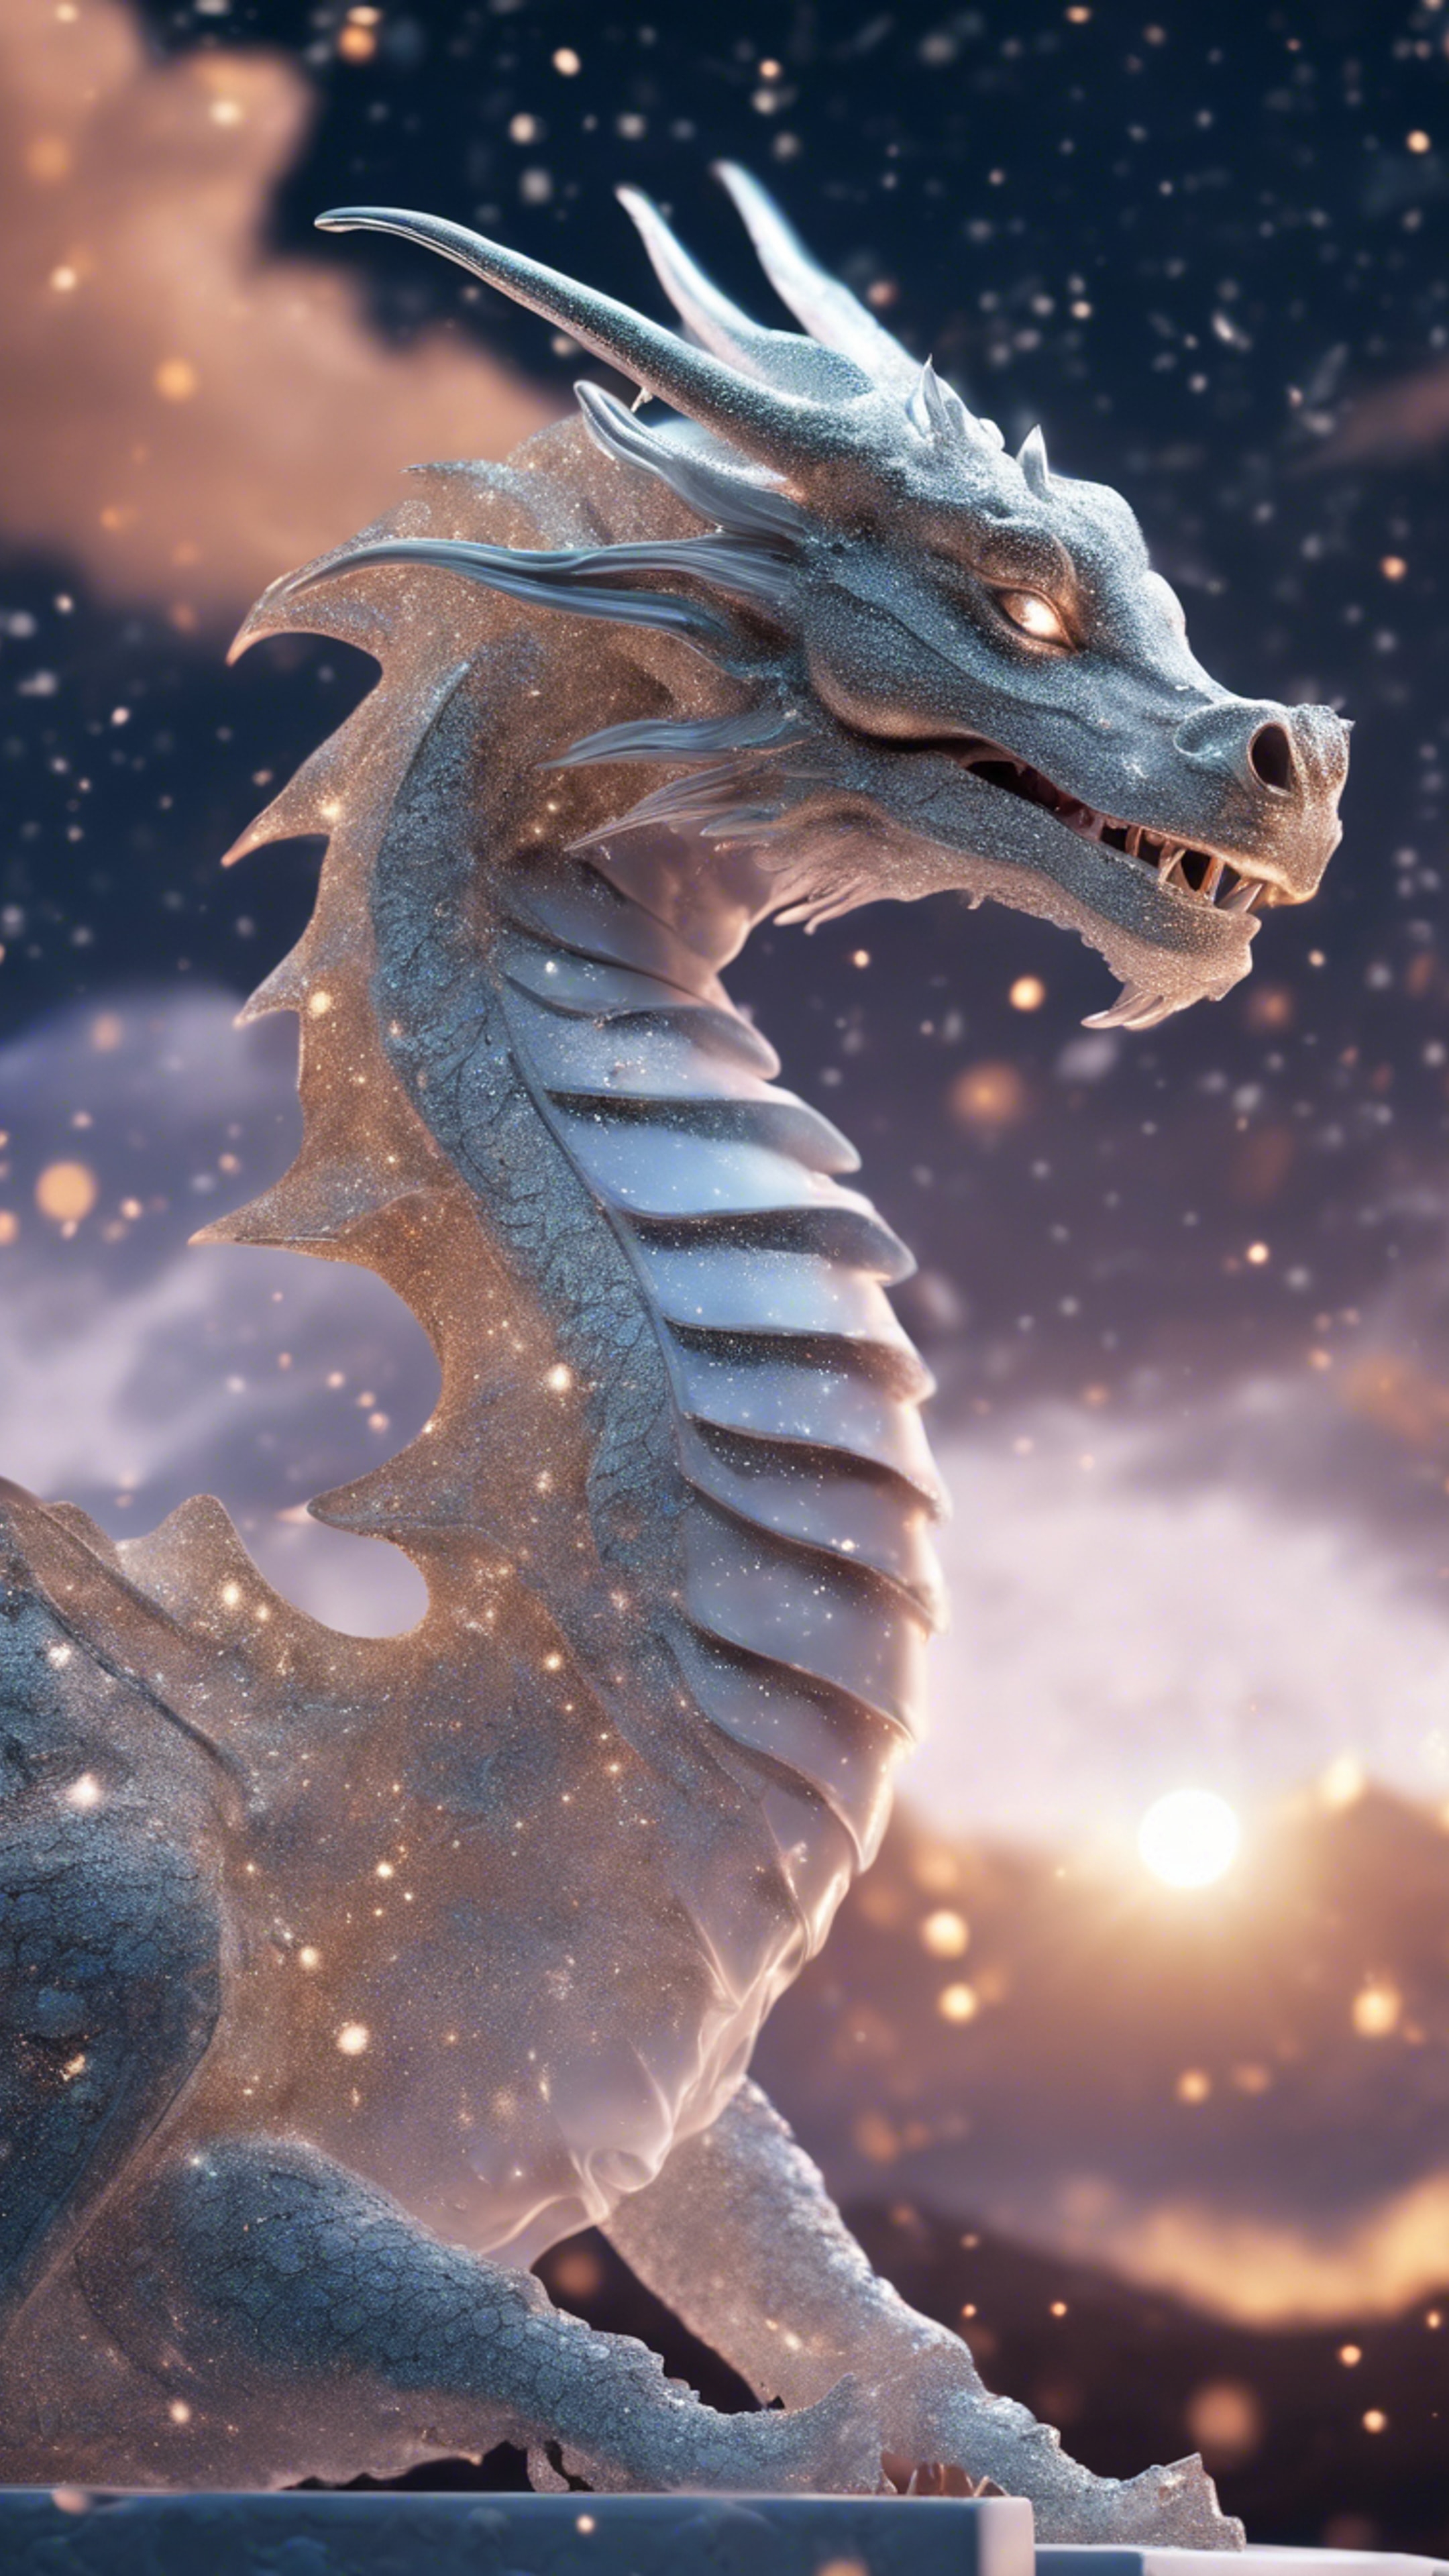 An ethereal cool dragon sculpted from stardust adorning the celestial sky on a clear night. Wallpaper[976eb7a710fe451ebd50]